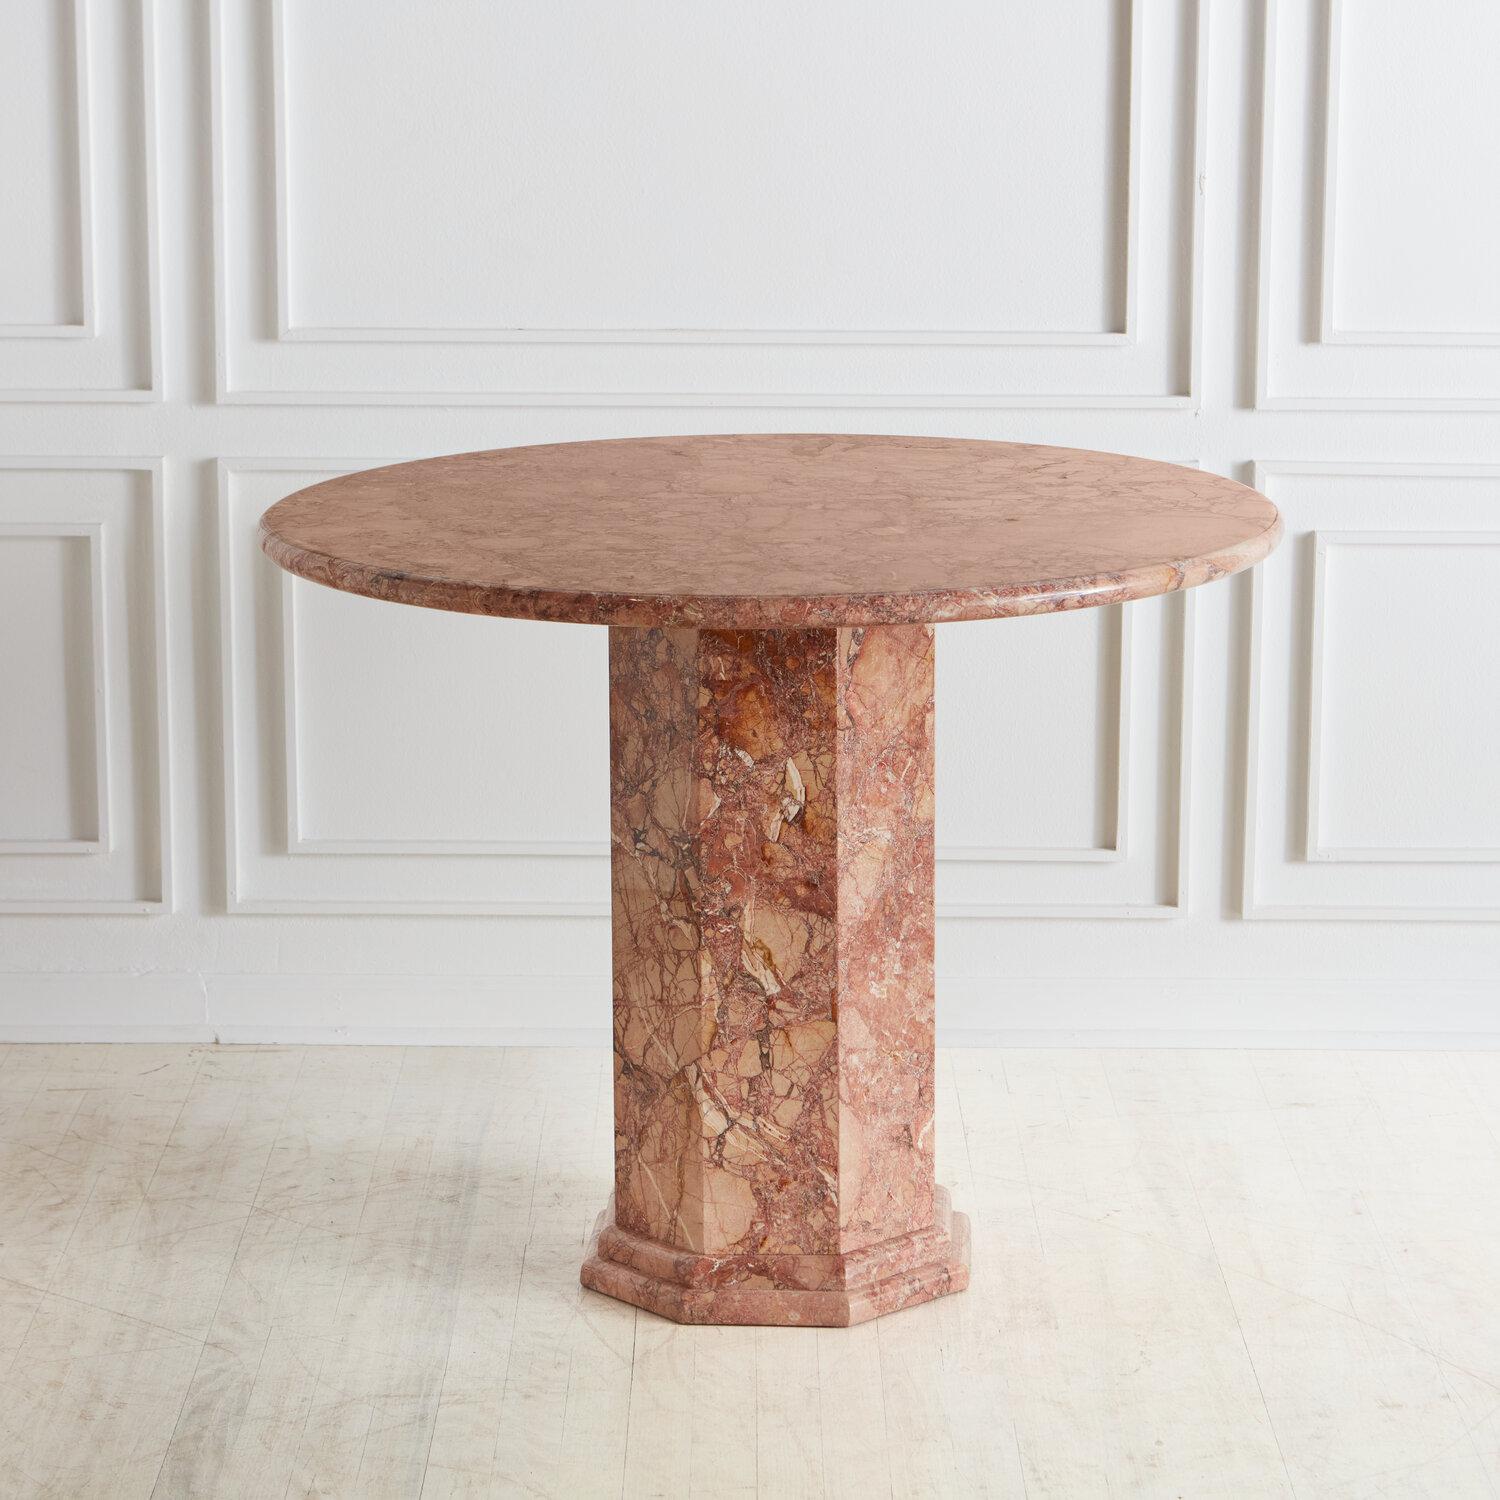 Breccia Pernice Marble Table with Hexagon Mitered Edge Base 1